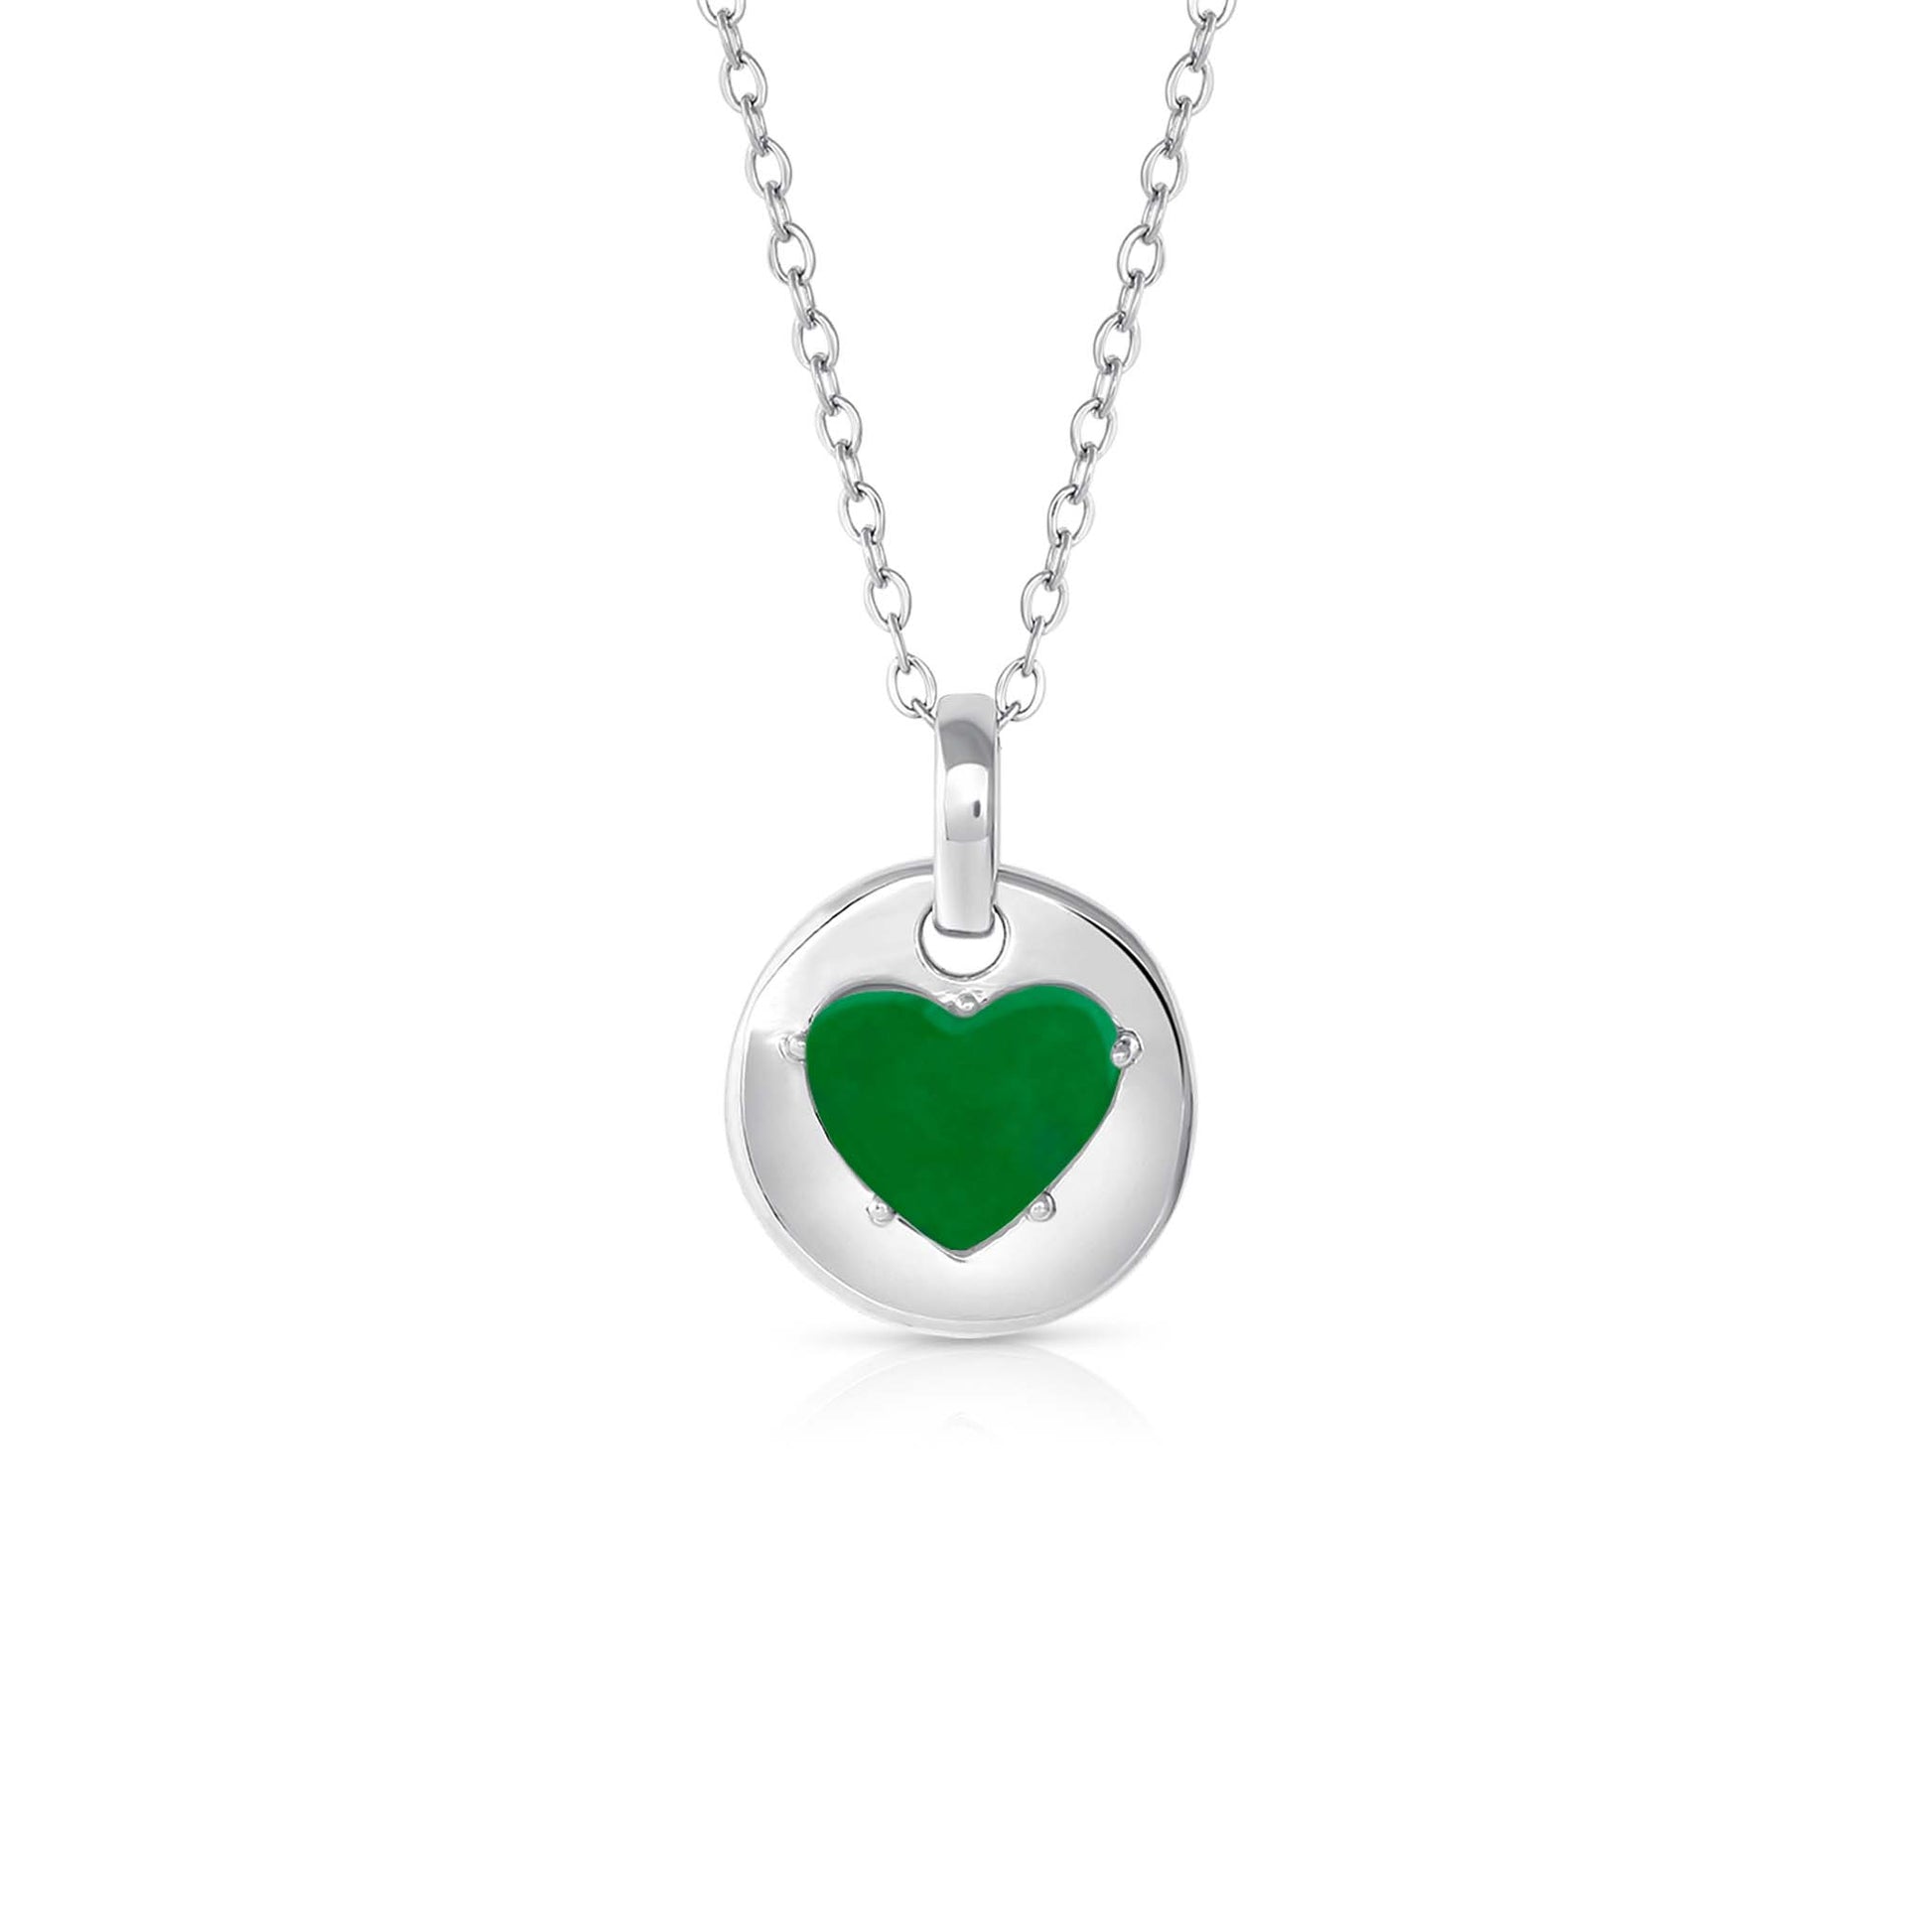 Peridot is August's birthstone and the gem for the 16th wedding anniversary.  This unique charm necklace is the perfect gift for yourself, Mother's Day, Valentine's Day, graduation, Christmas and birthdays. A personalized gift idea for every mom, grandma, bride, bridesmaid, daughter, wife, mother-in-law & loved one.